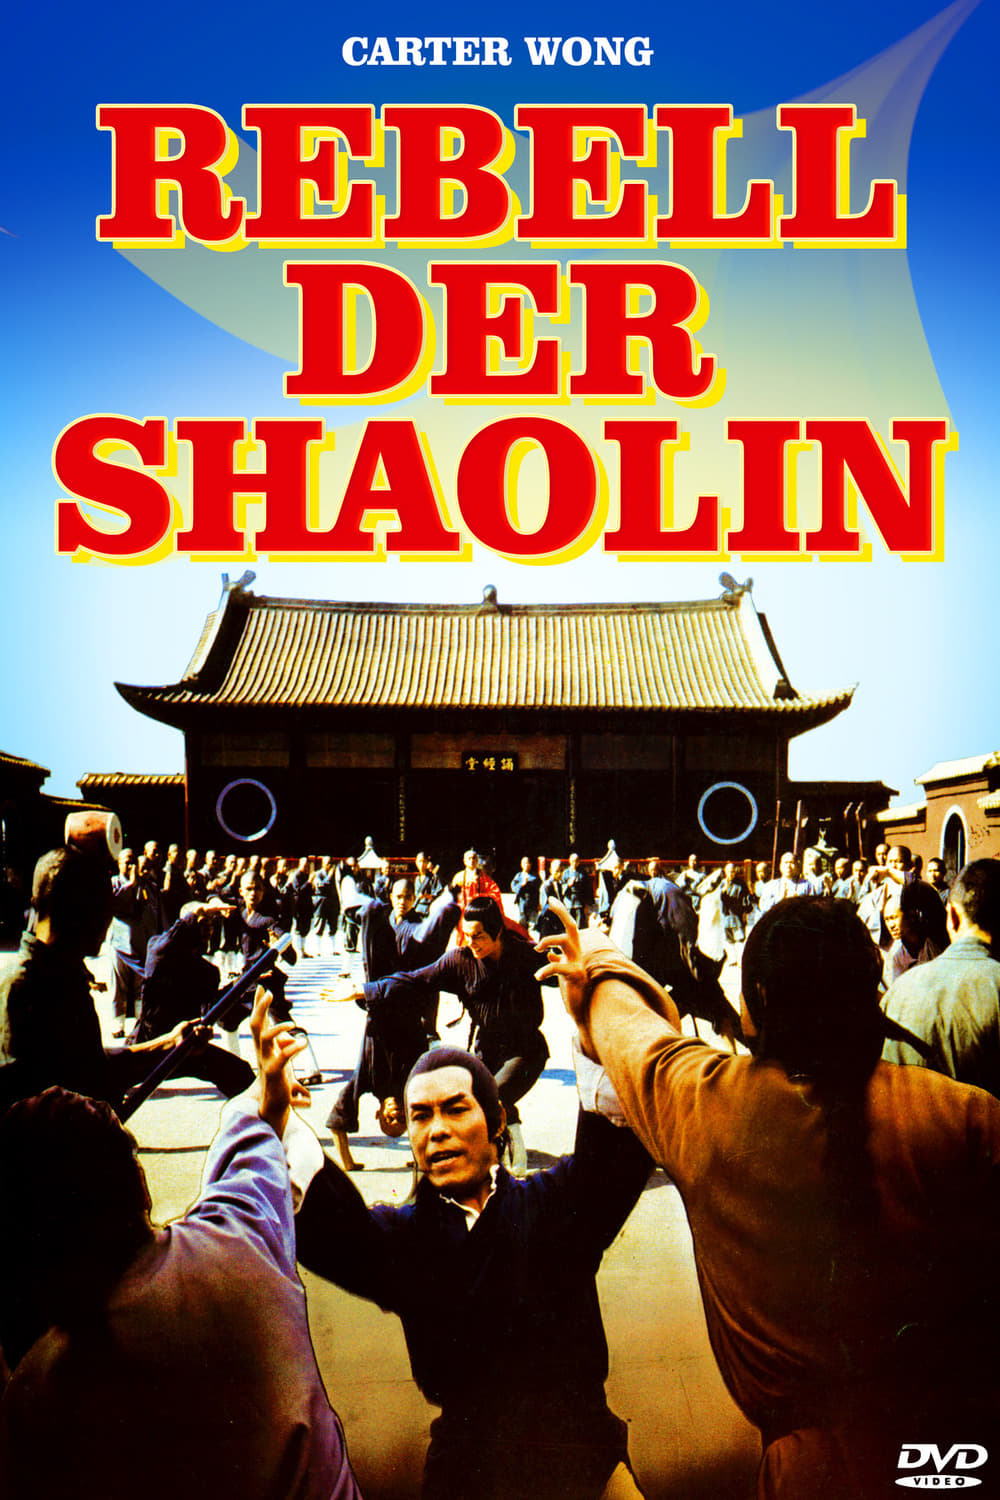 The Rebel of Shao-lin